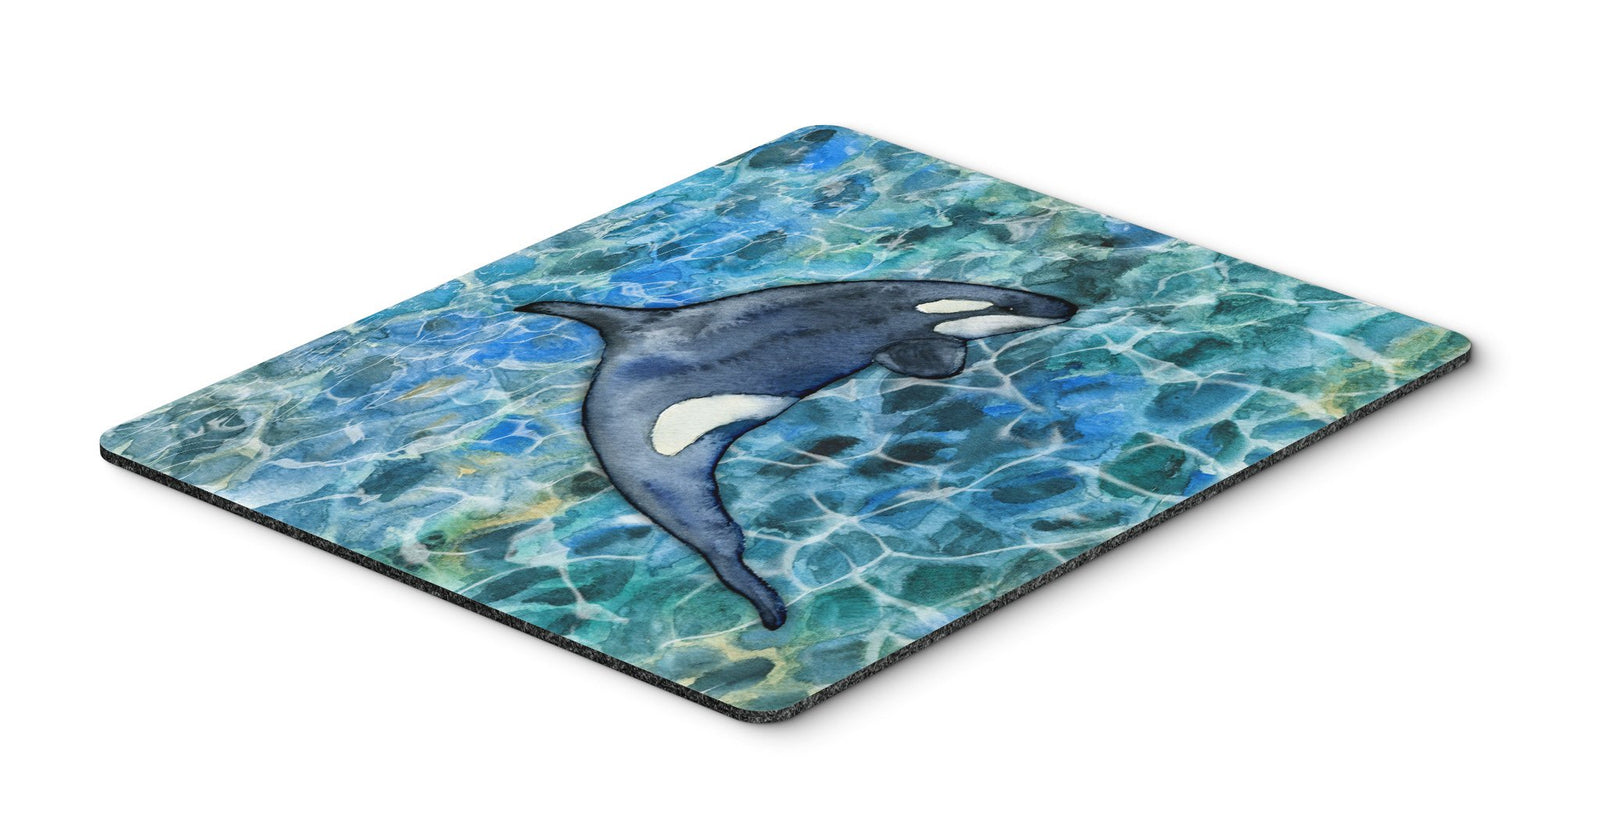 Killer Whale Orca #2 Mouse Pad, Hot Pad or Trivet BB5335MP by Caroline's Treasures